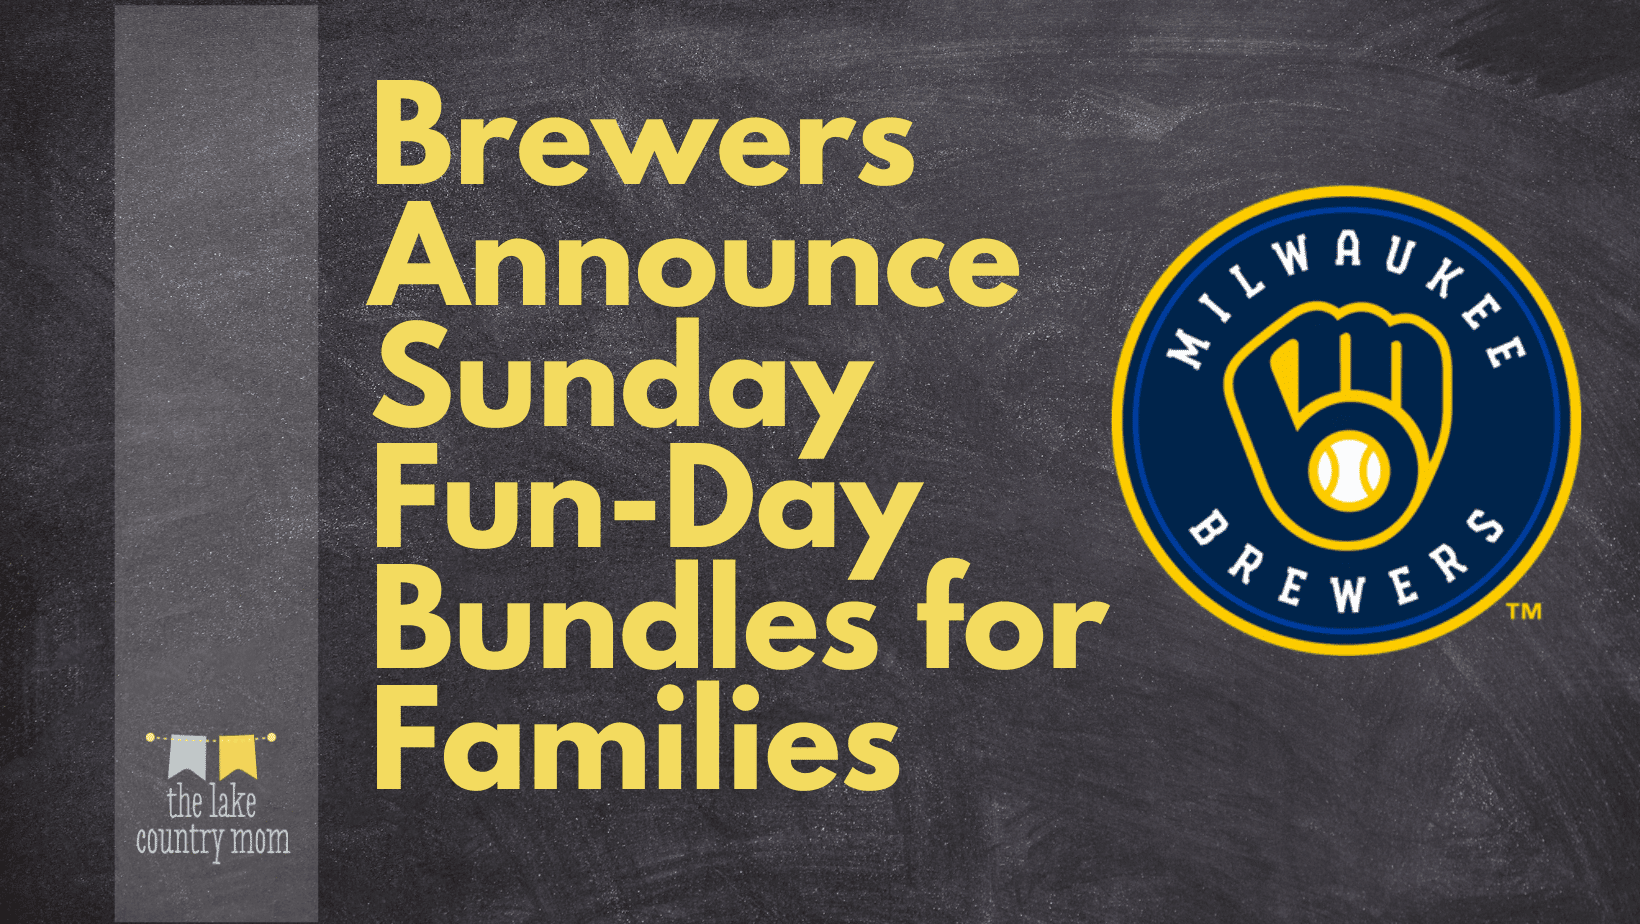 Brewers Announce Sunday Fun-Day Bundles for Families